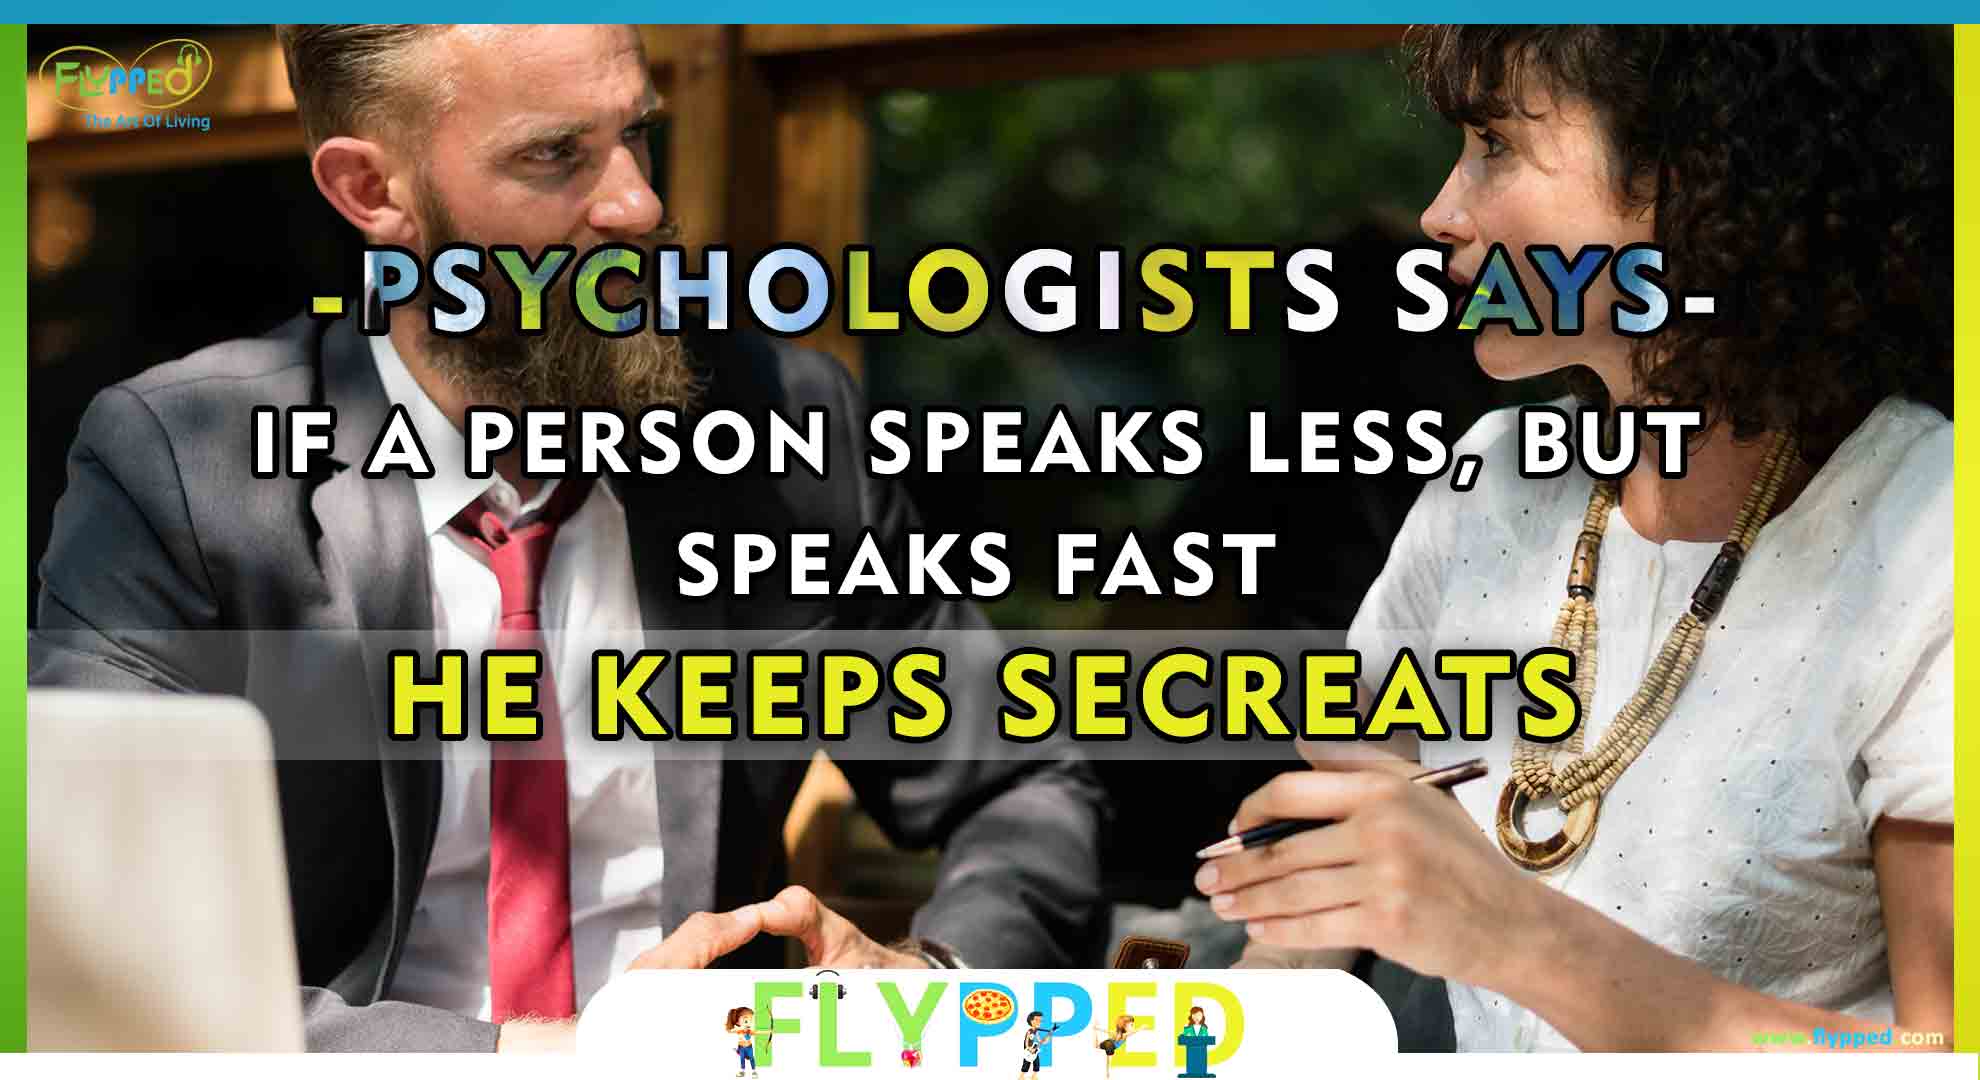 Psychologists-says-about-person6